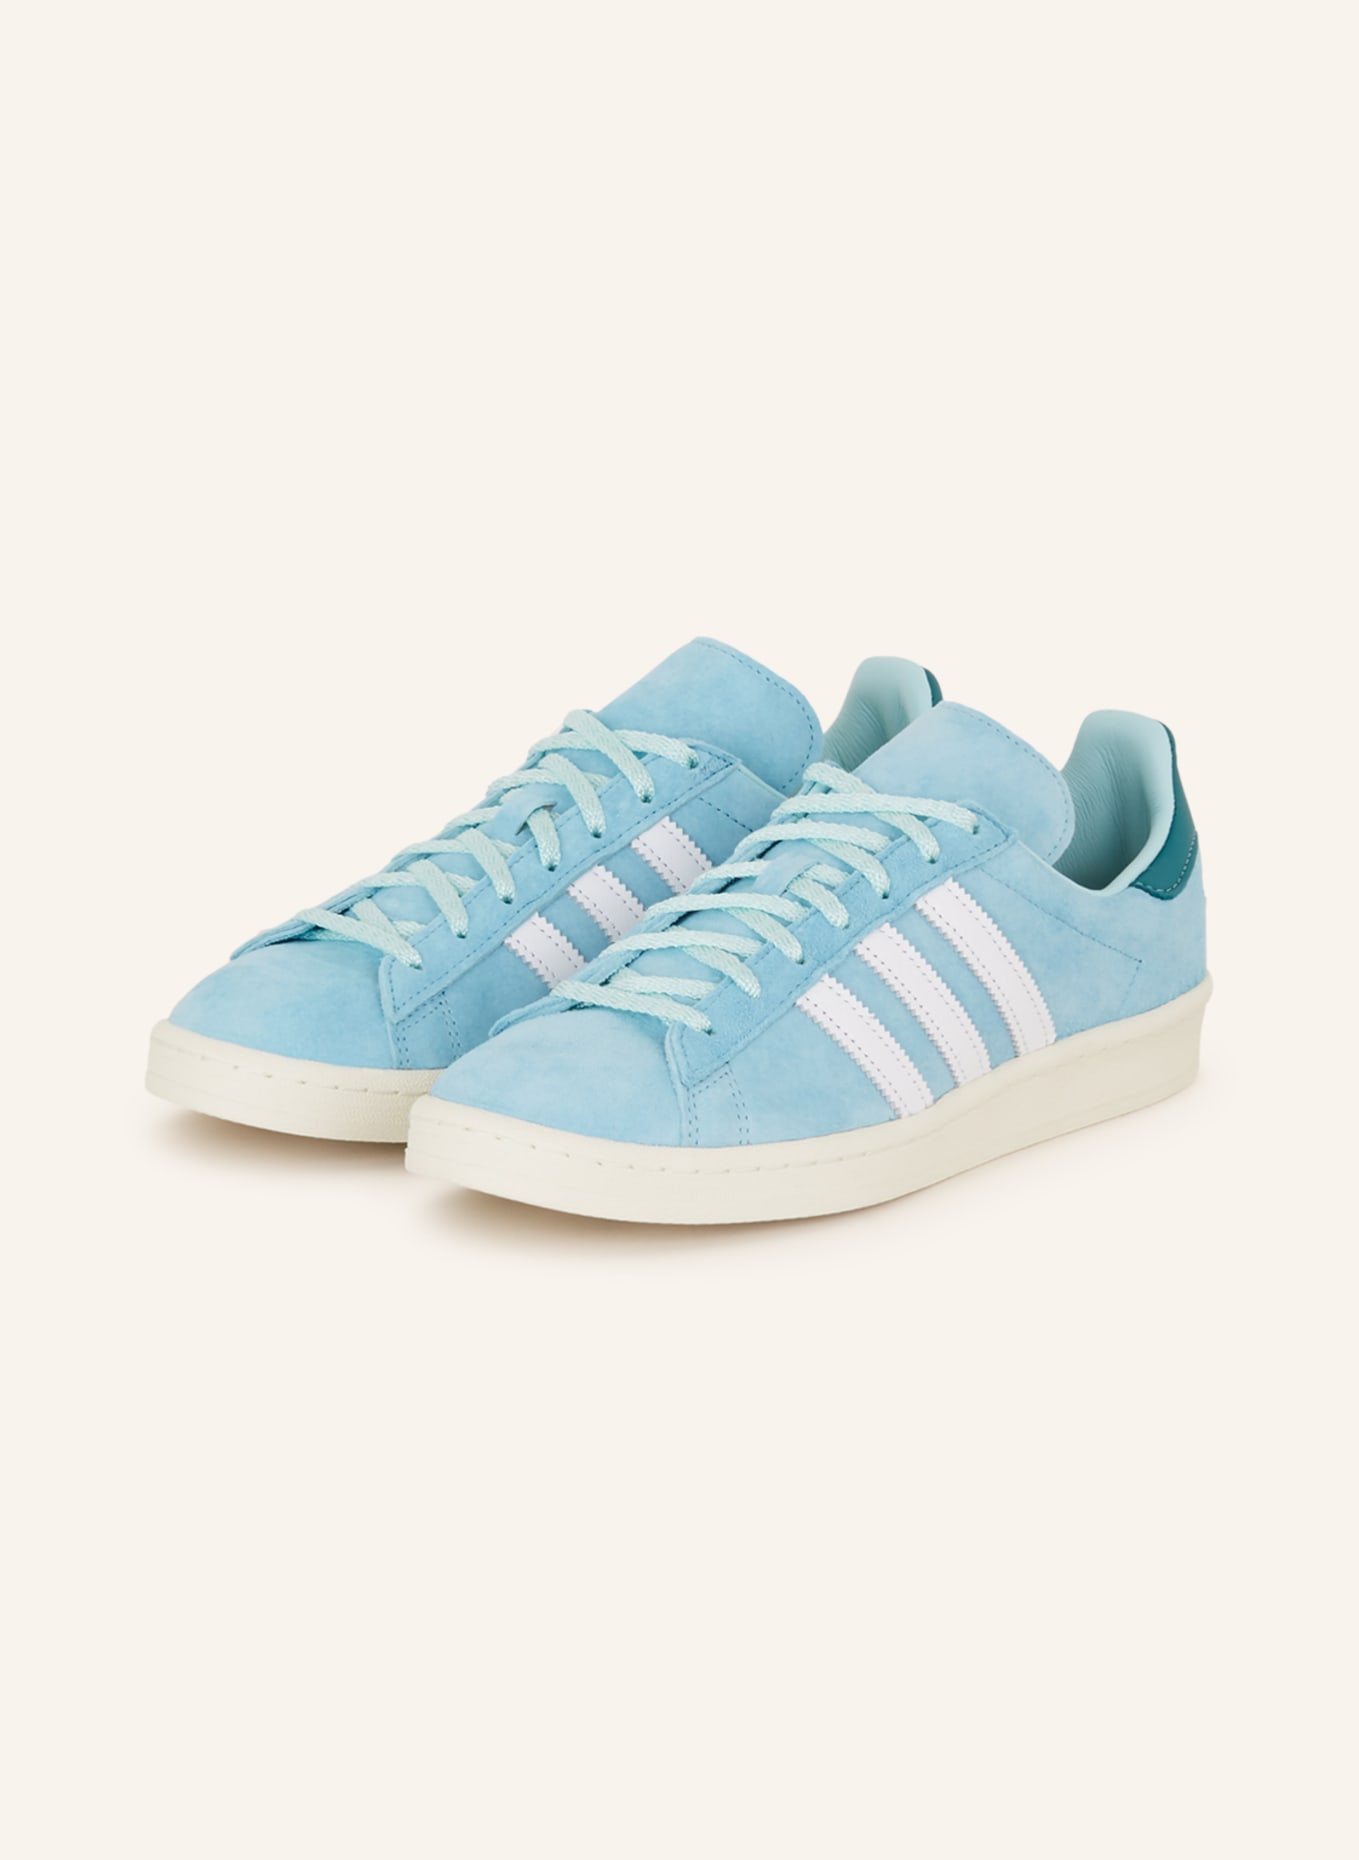 tab Omvendt Idol adidas Originals Sneakers CAMPUS 80S in light blue/ white